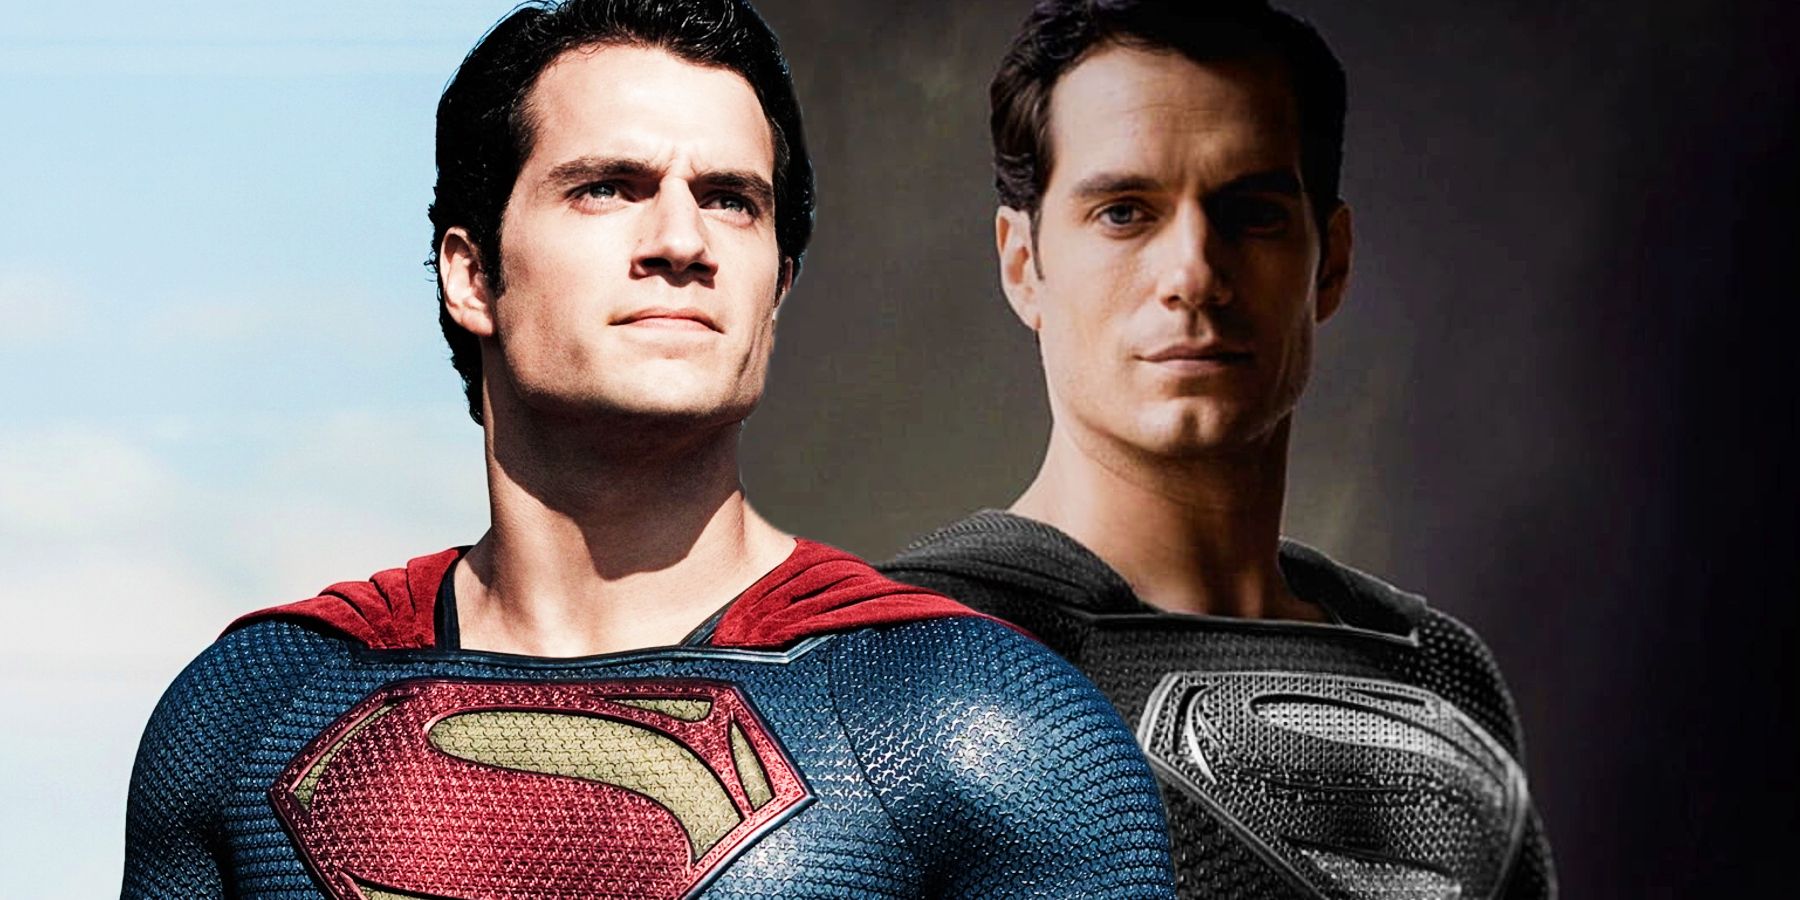 Henry Cavill as Superman in Man of Steel and Zack Snyder's Justice League